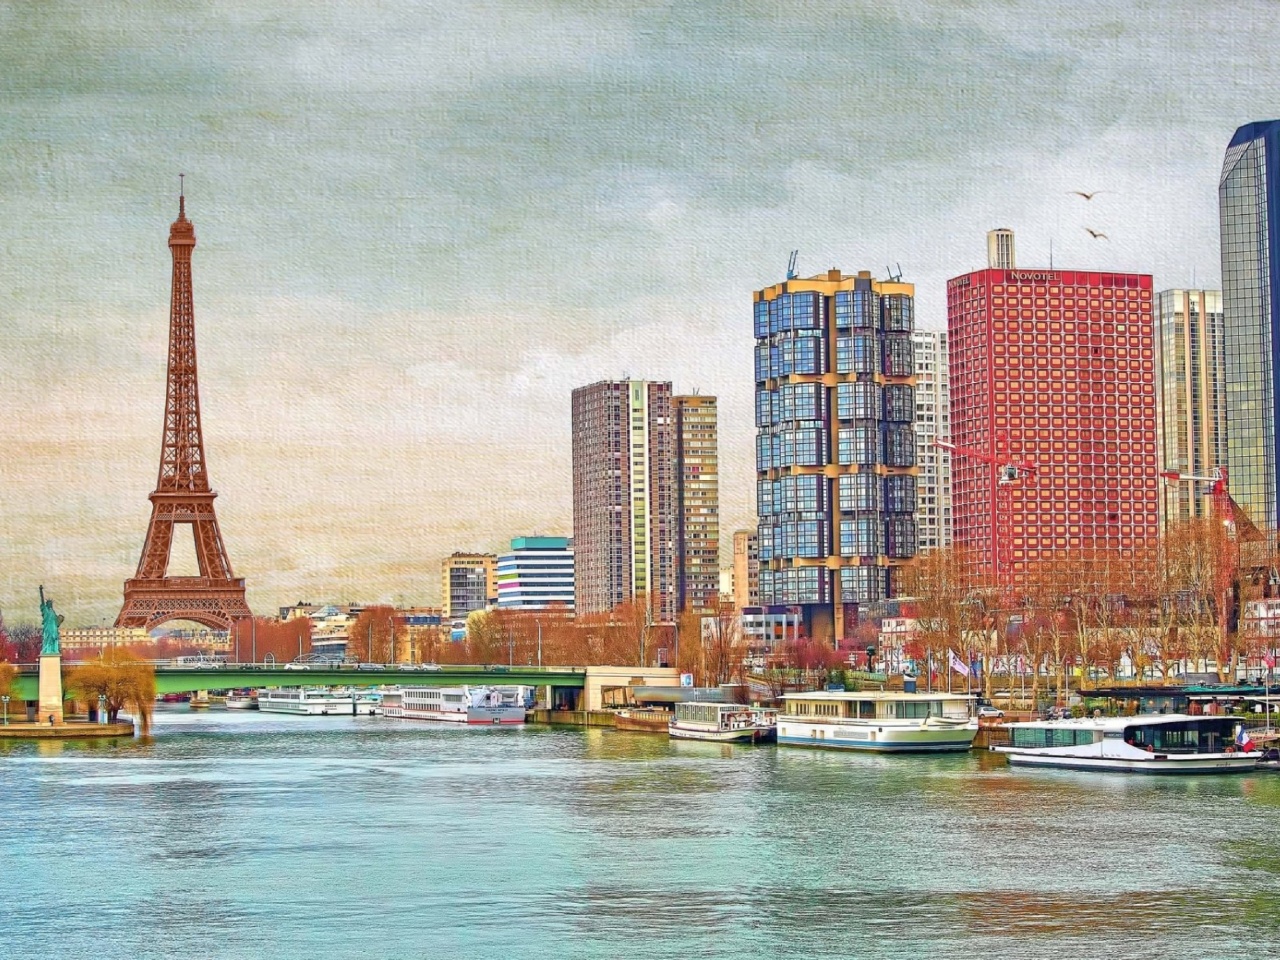 Eiffel Tower and Paris 16th District wallpaper 1280x960